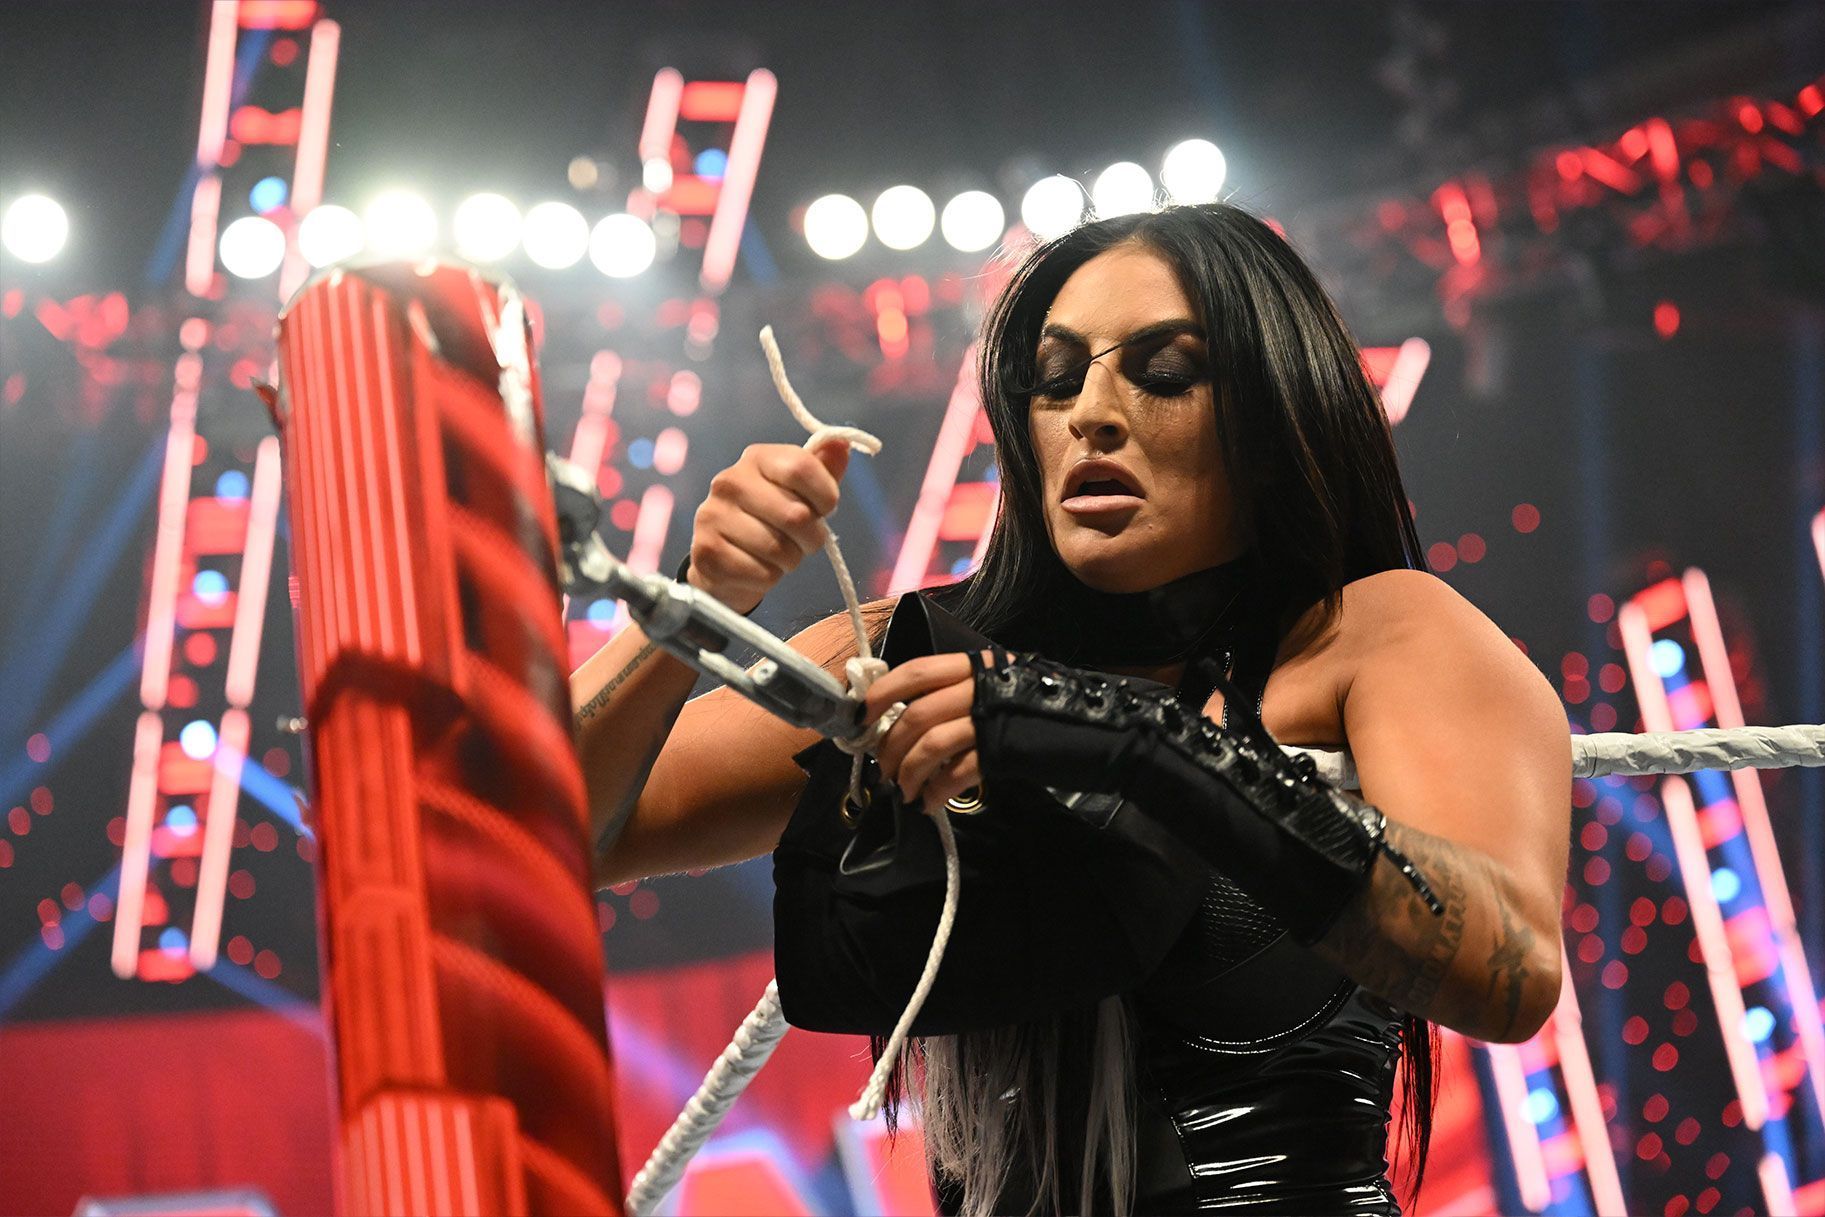 Could Sonya Deville join the growing field for Money in the Bank?